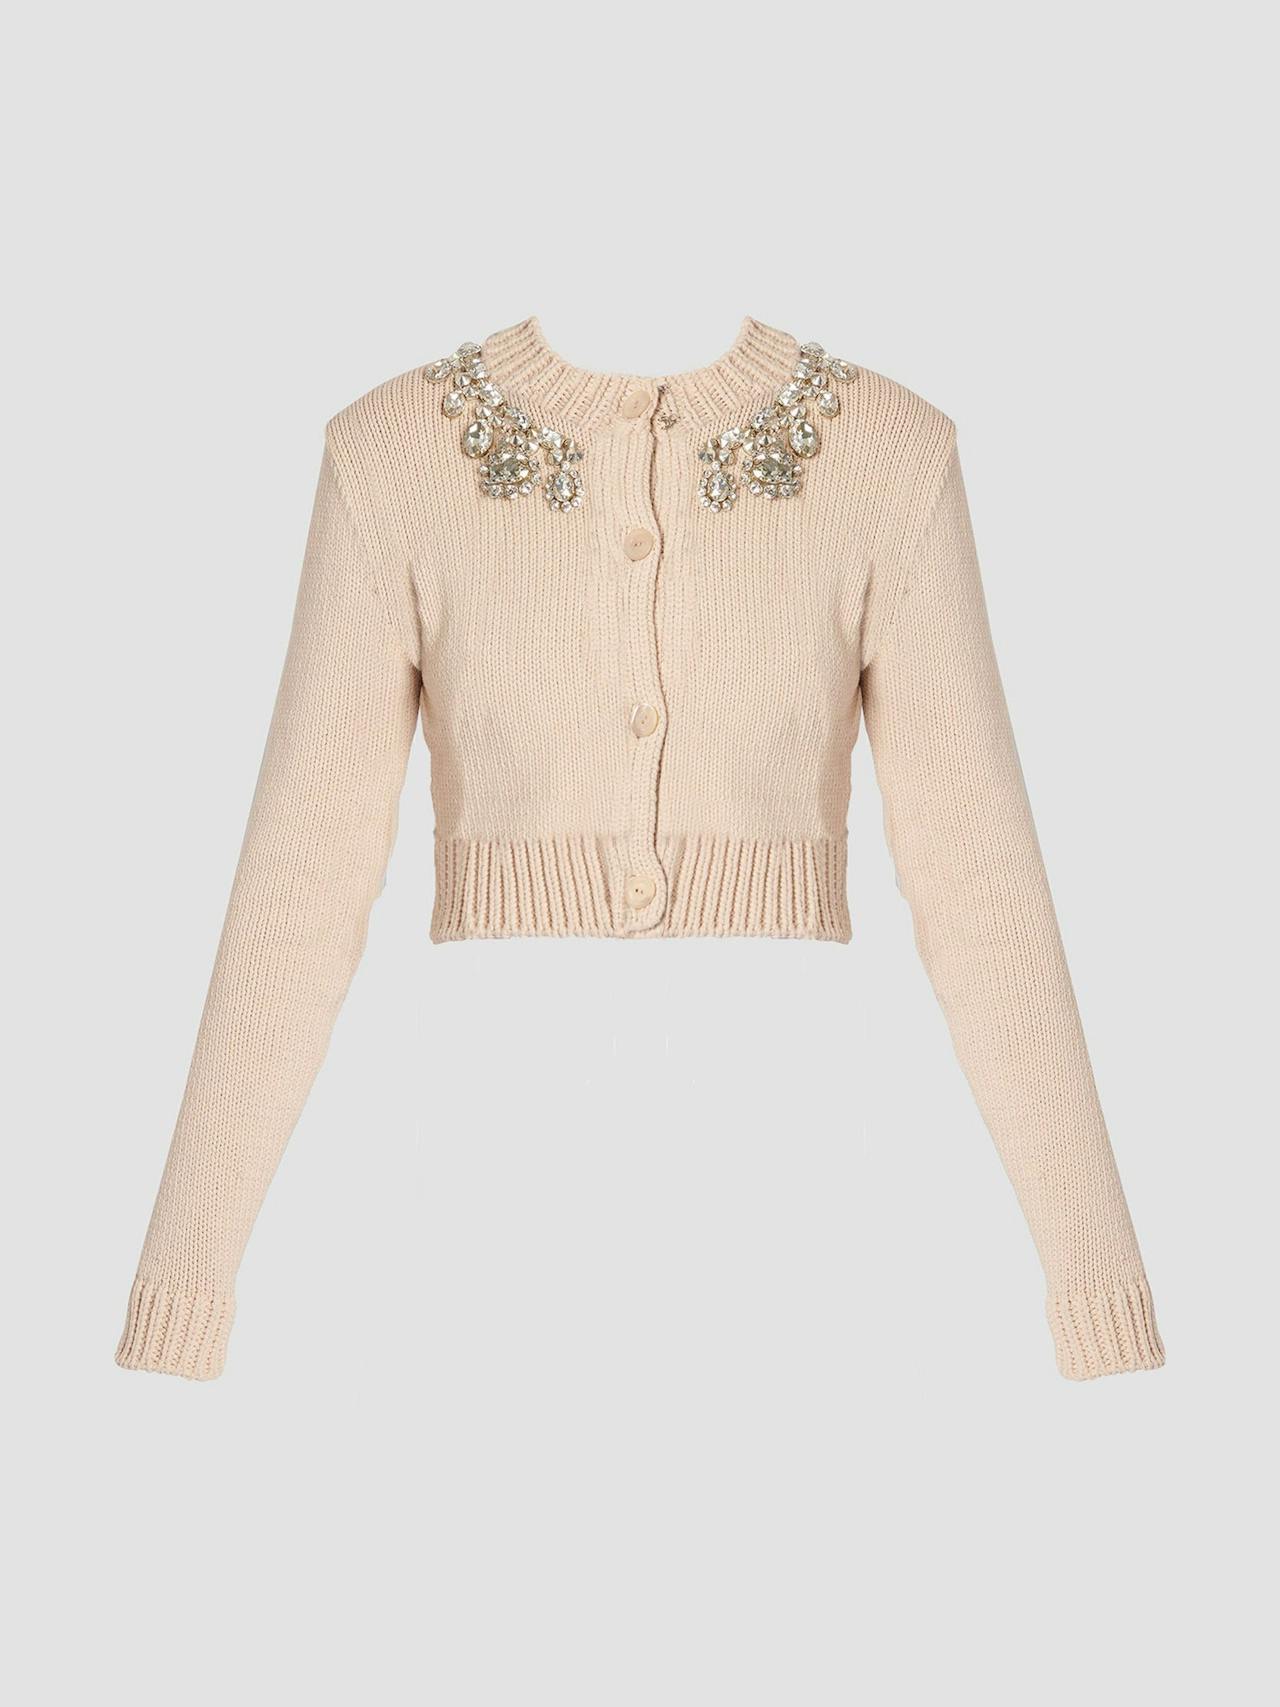 Ballet pink embroidered cotton knit cropped cardigan